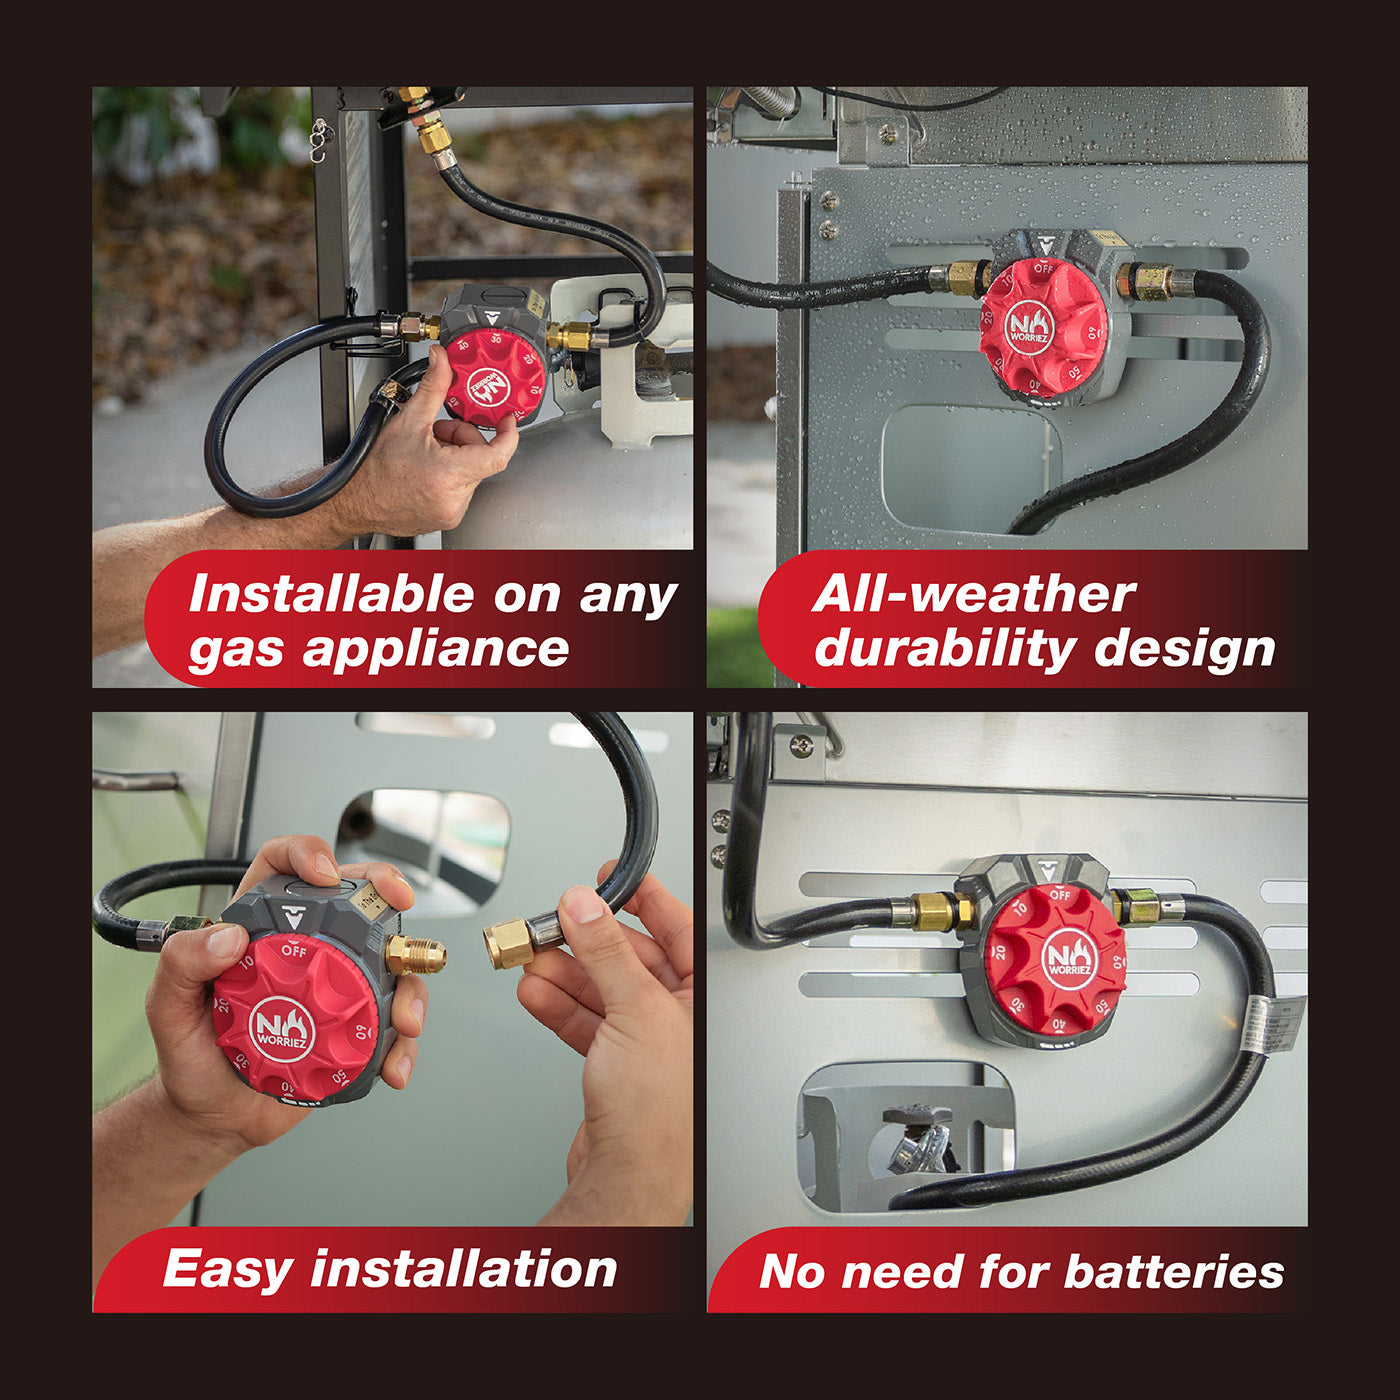 No Worriez gas timer is no need for batteries and all-weather durable easy to install